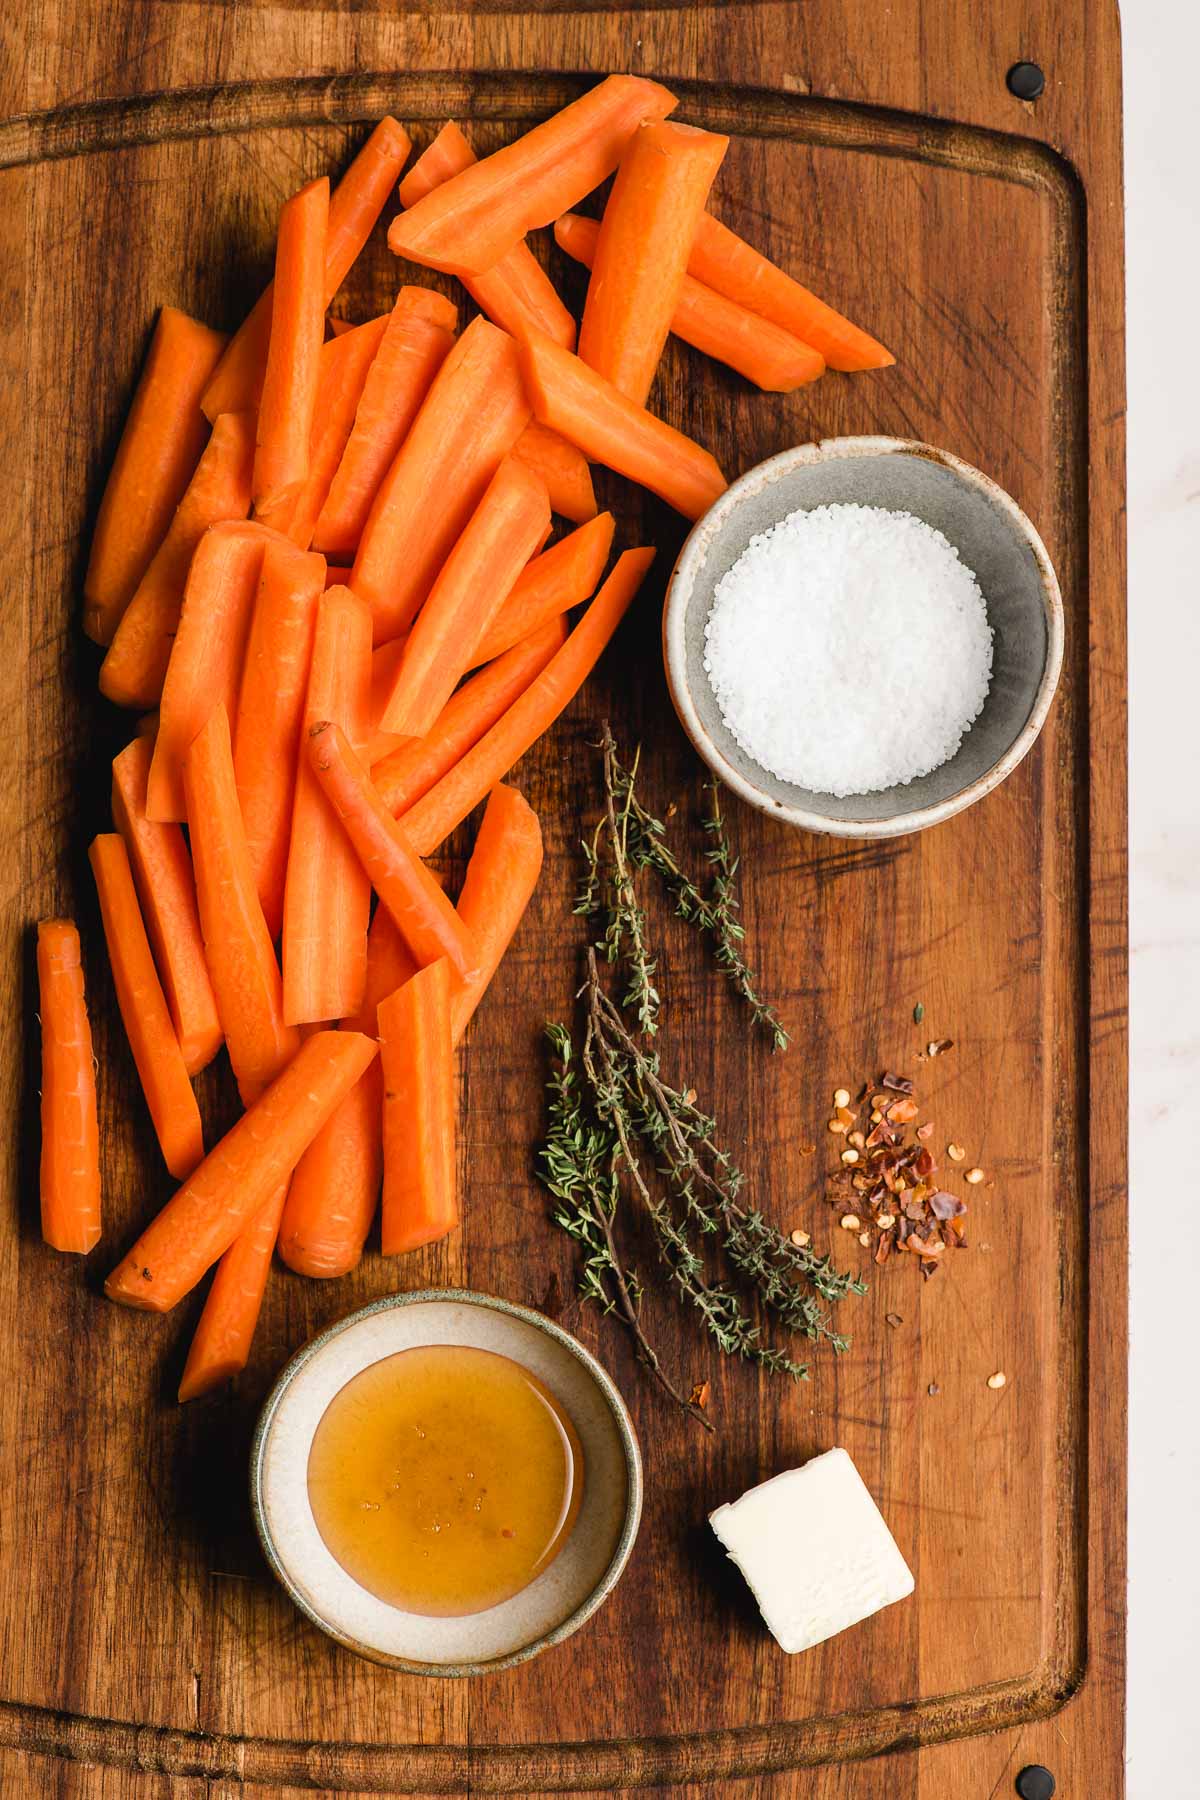 Ingredients prepared on a board for a carrot saute.